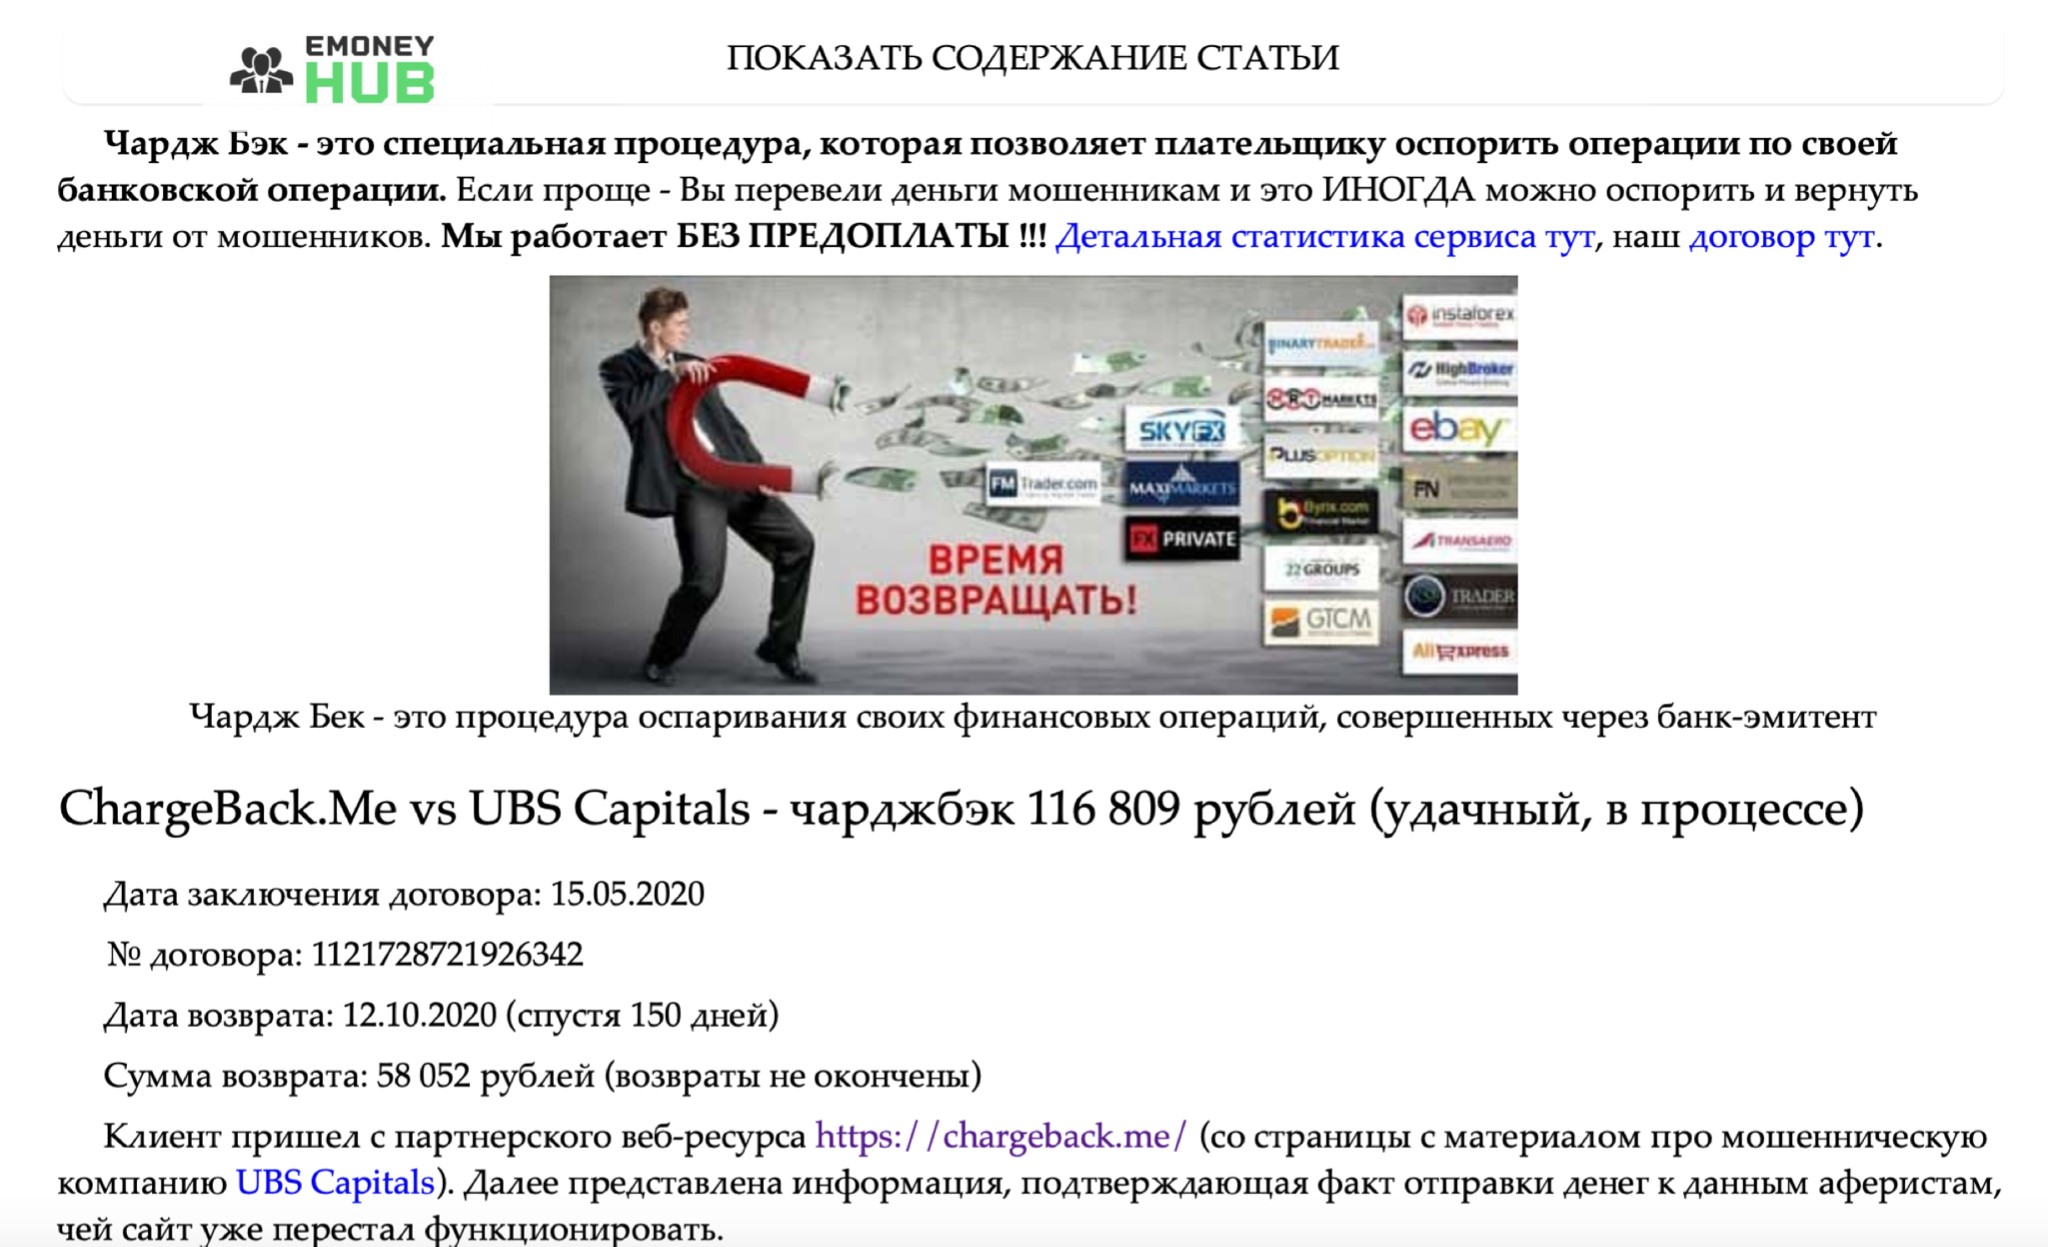 chargeback.me и forex-brokers.pro